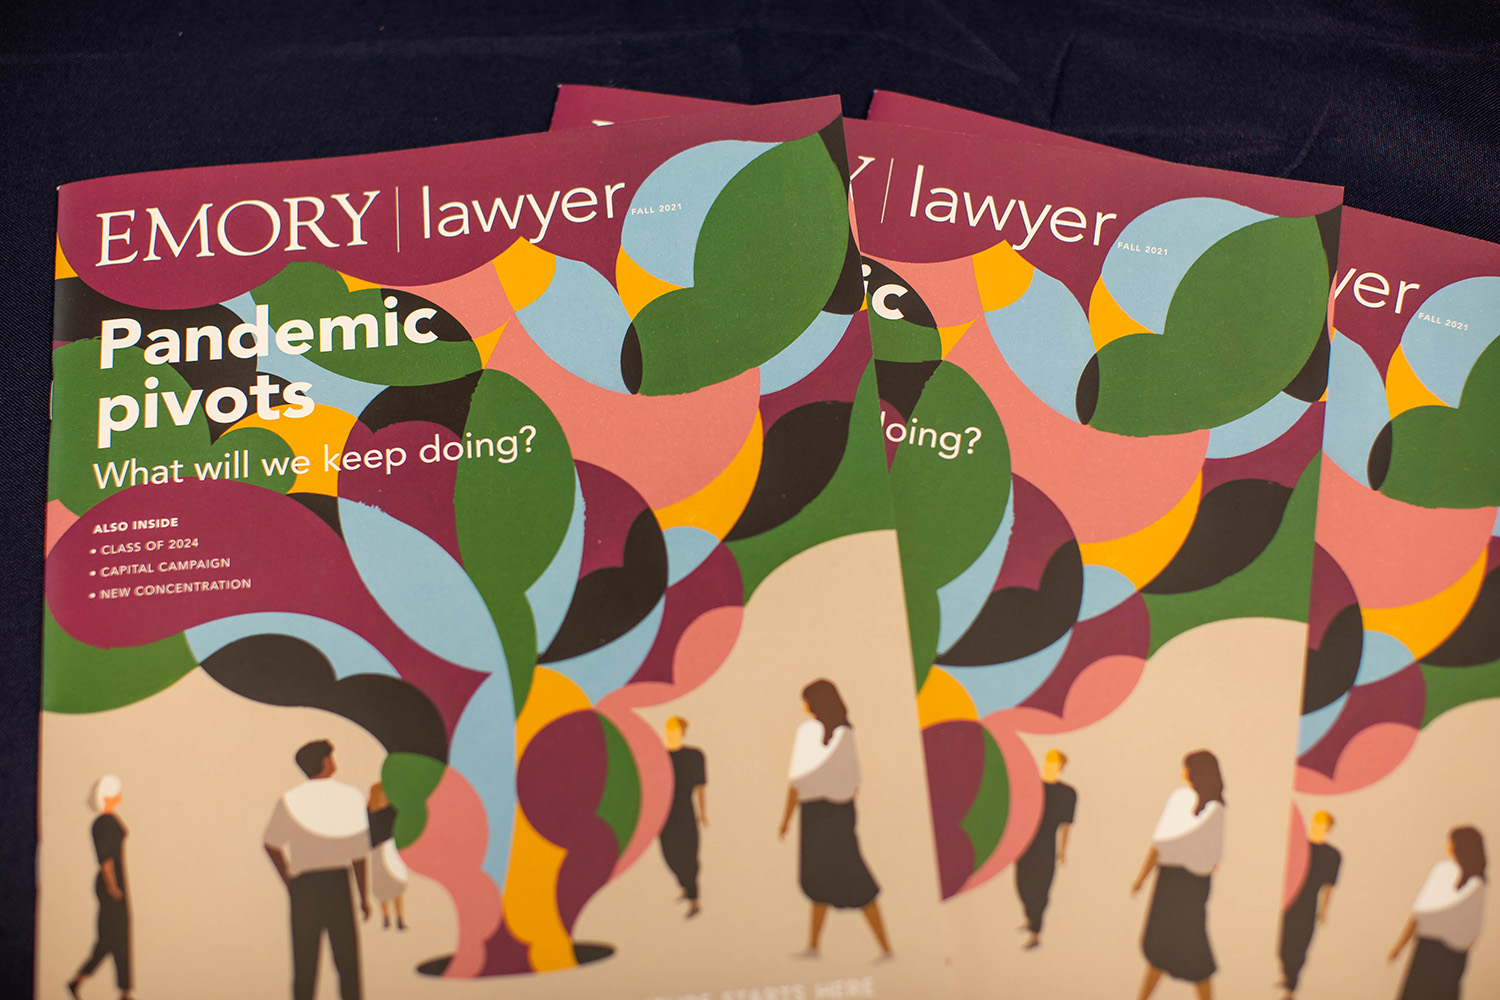 Several copies of LAWYER magazine laid out on dark background